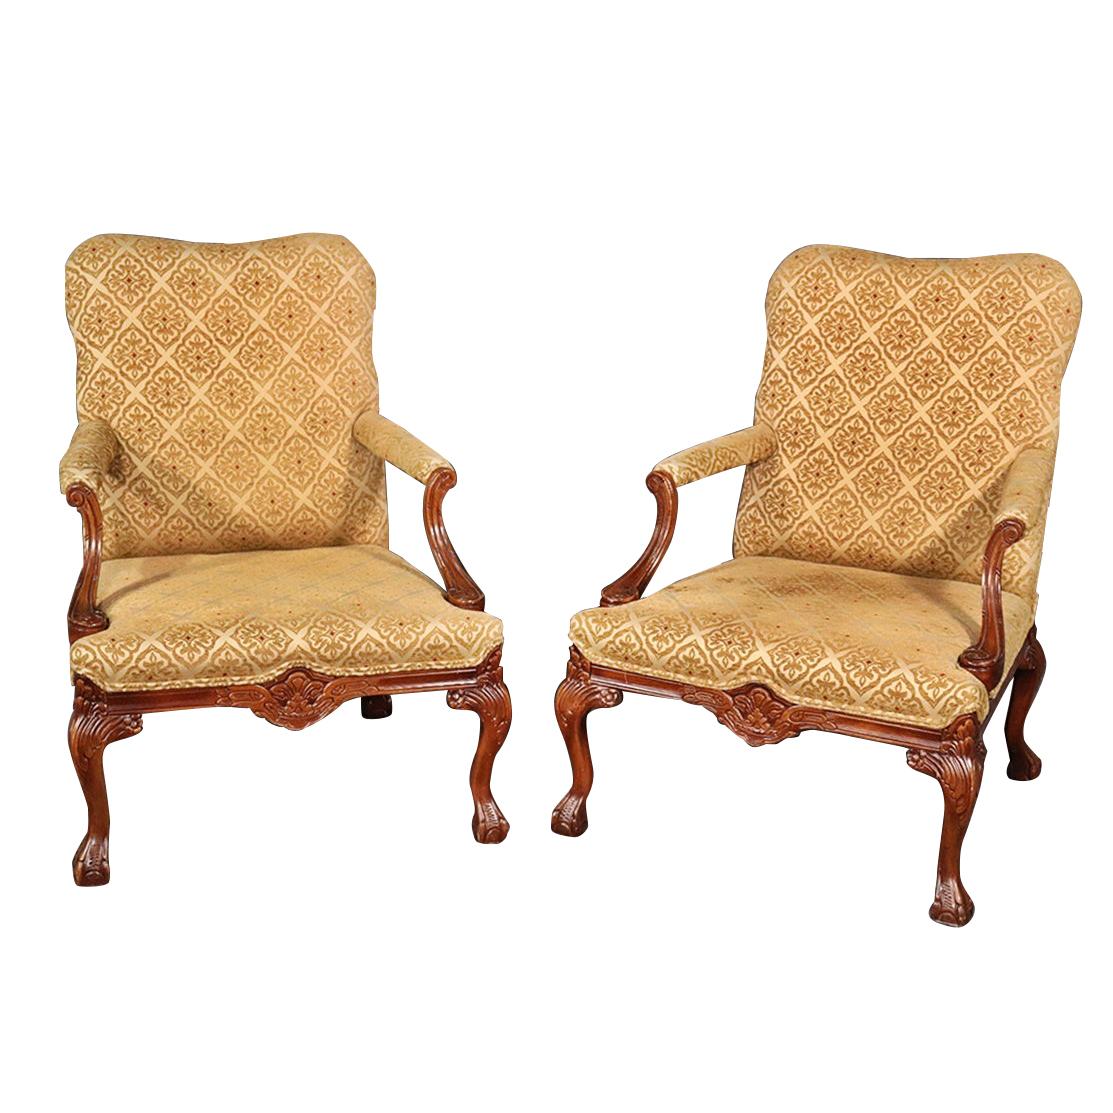 Pair of English Georgian Style Carved Walnut Lounge Chairs